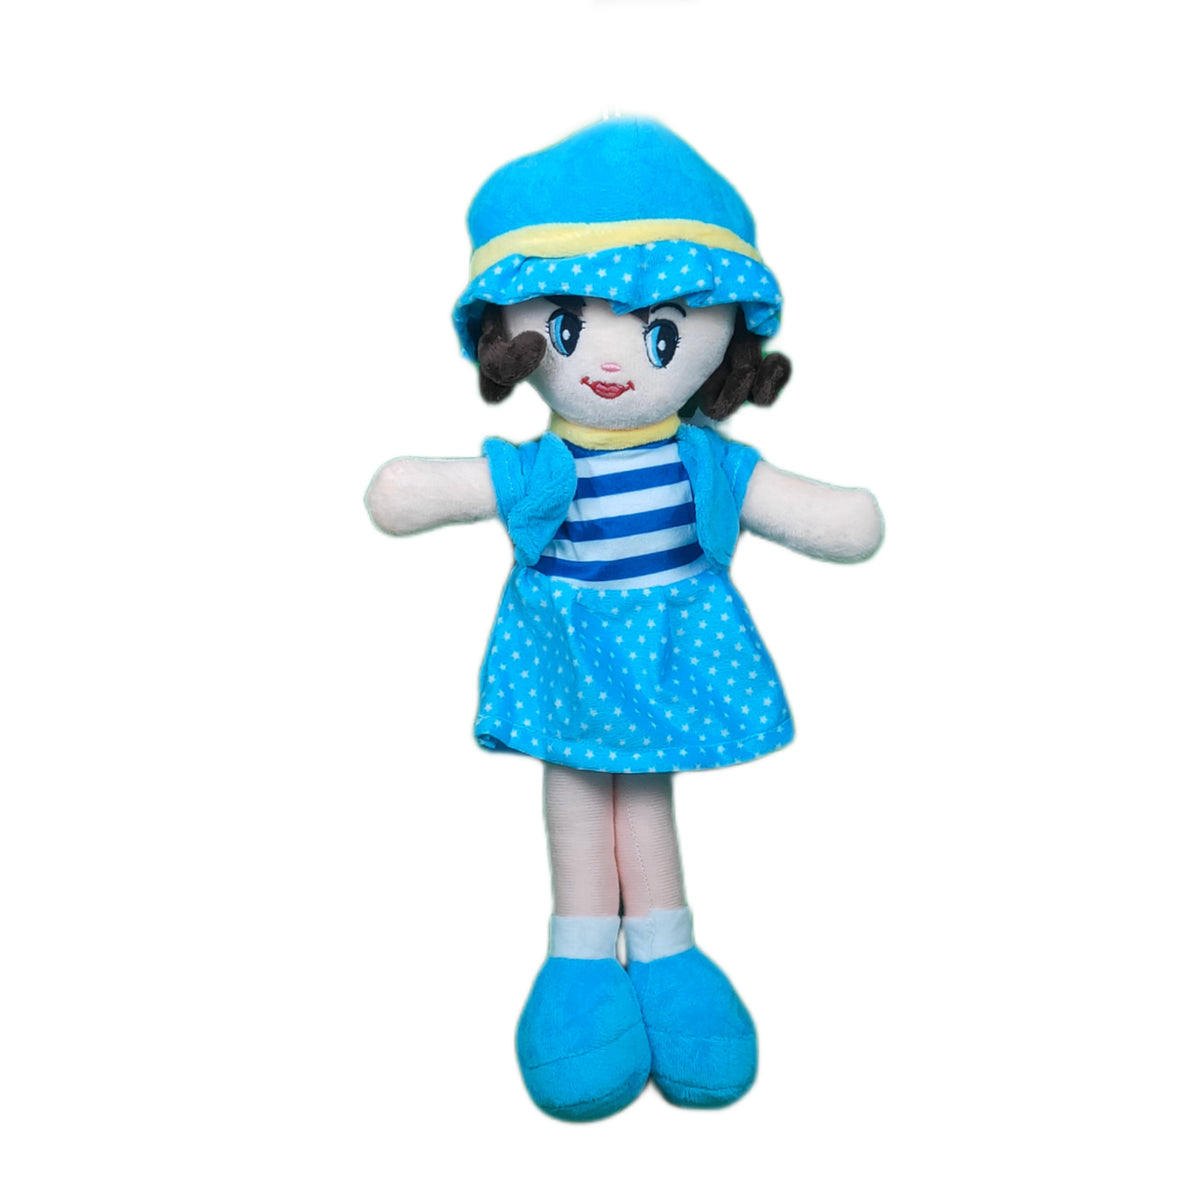 Play Hour Winky Rag Doll Plush Soft Toy Wearing Blue Dress for Ages 3 Years and Up, 40cm